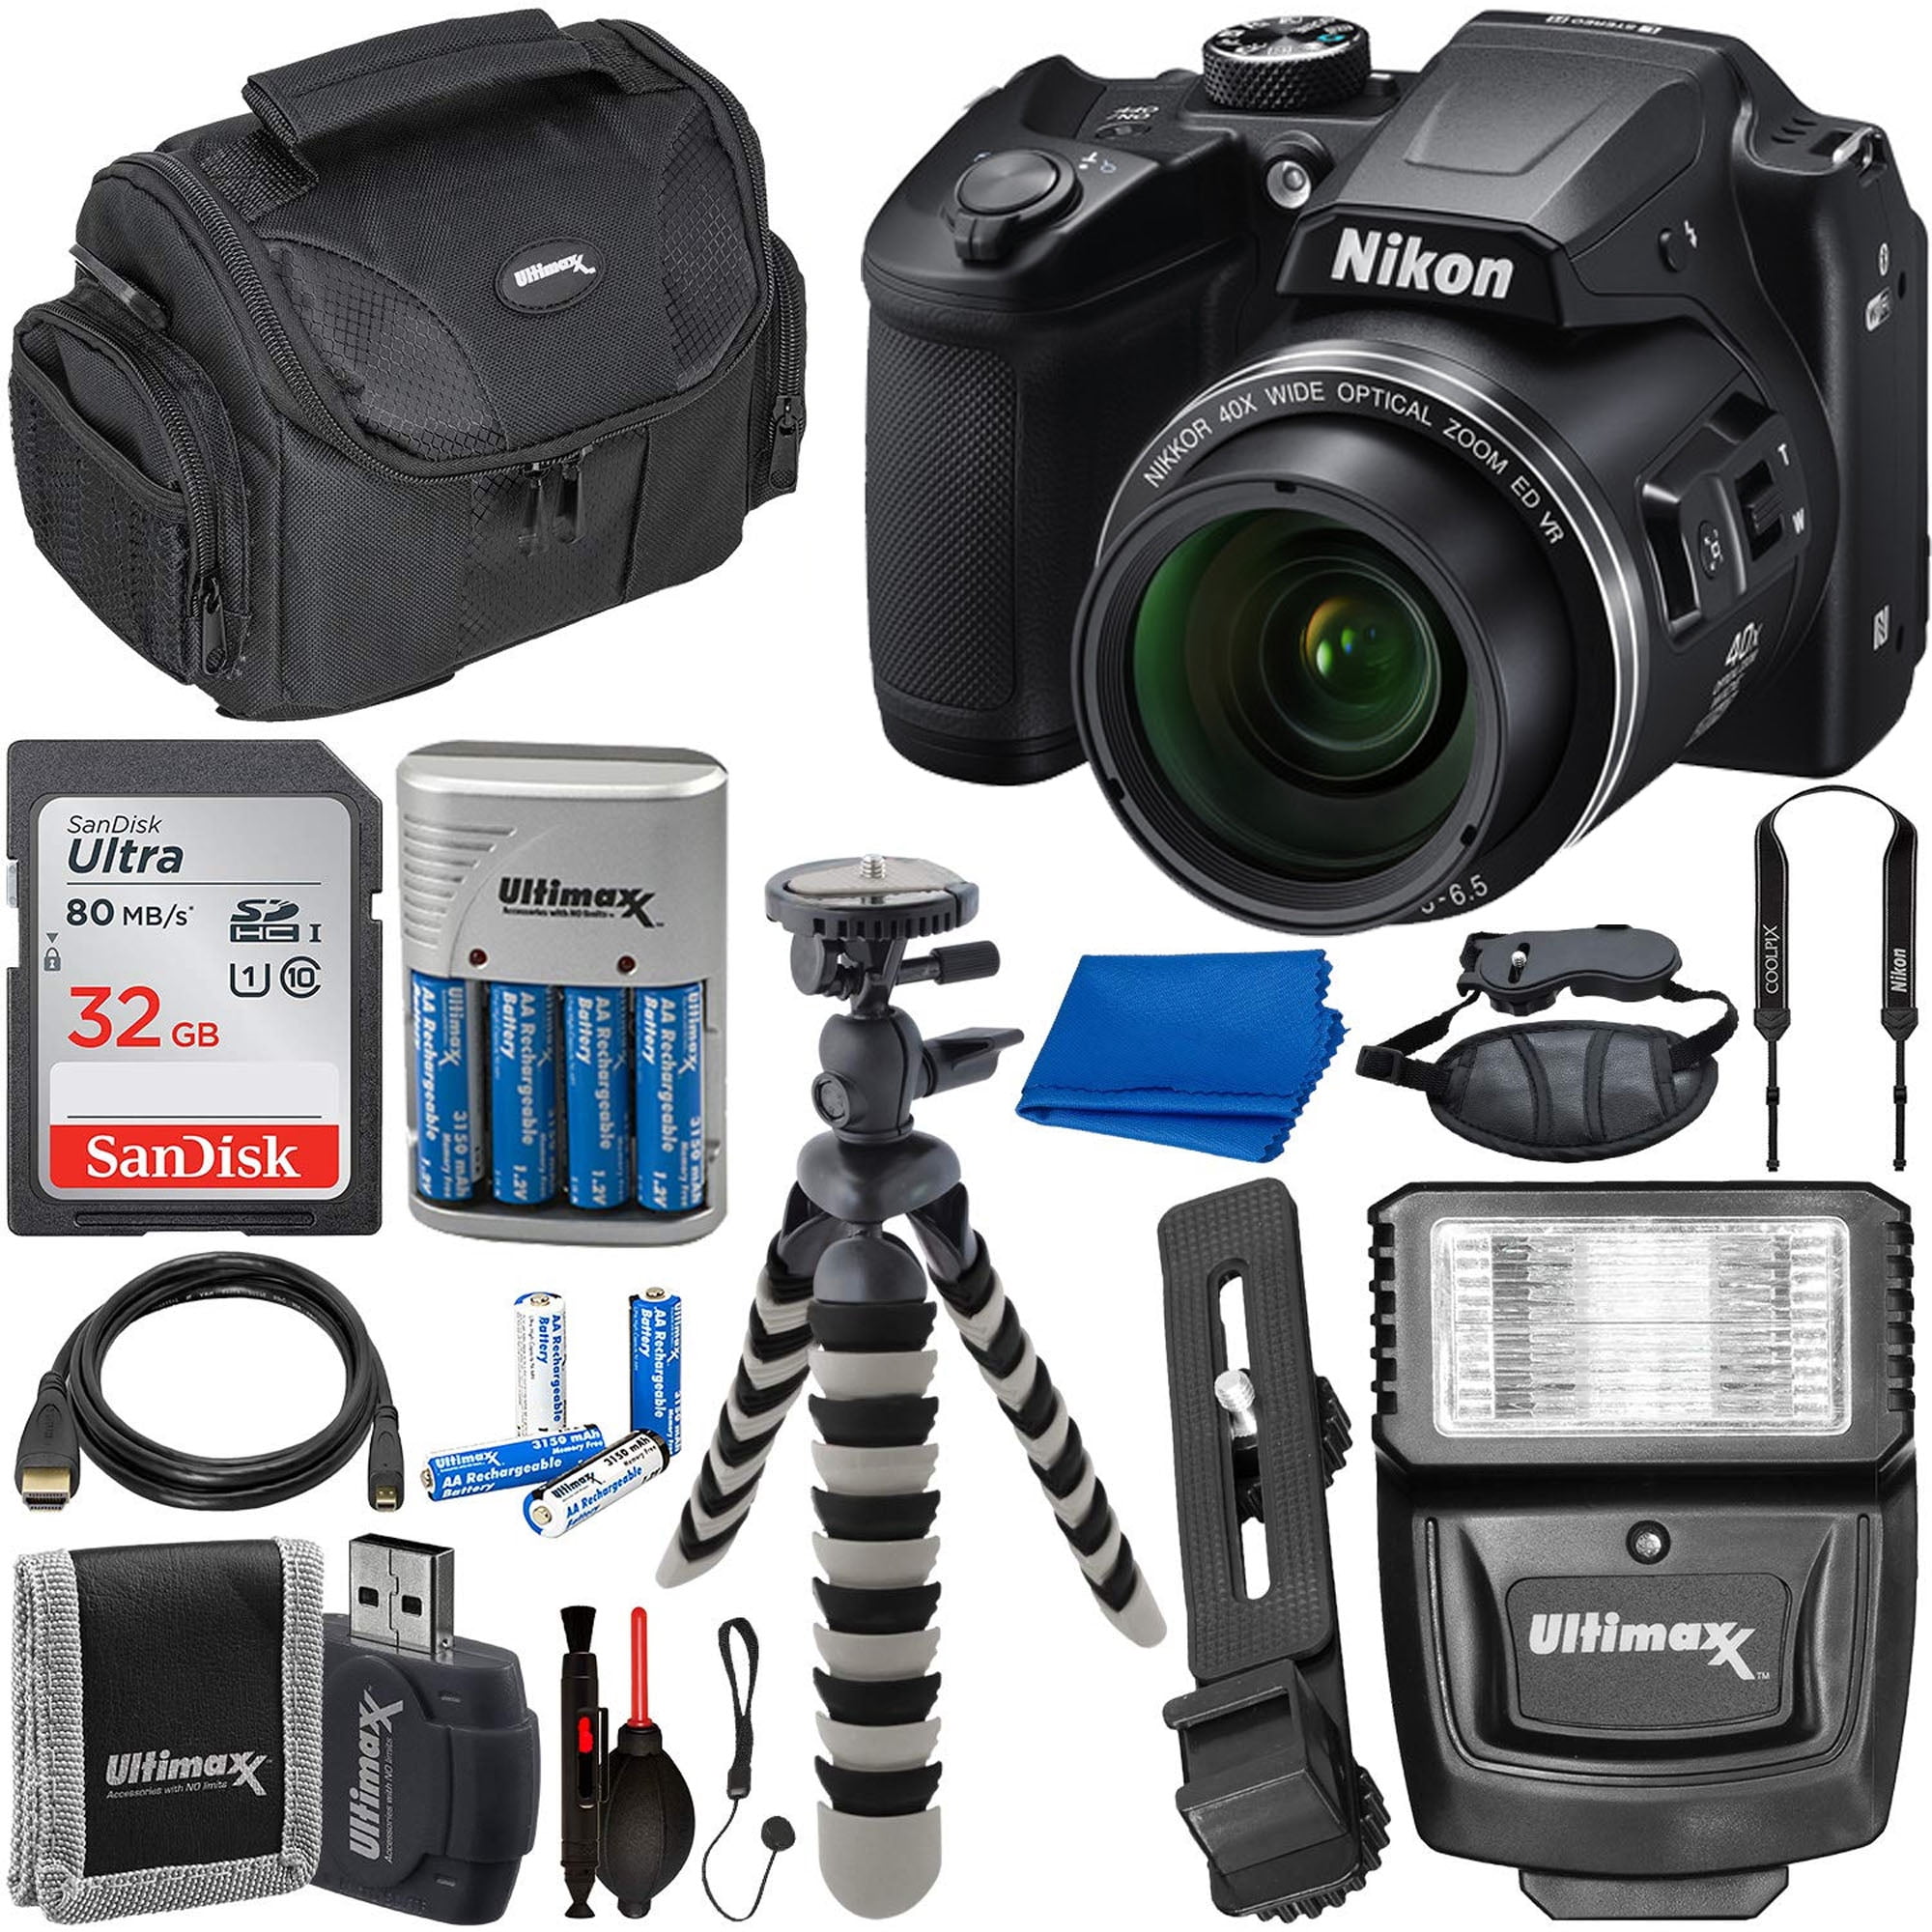 Nikon COOLPIX B500 Digital Camera W SanDisk Ultra 32GB SDHC Memory Card,  Rechargeable Batteries & Charger, Digital Slave Flash & Much More